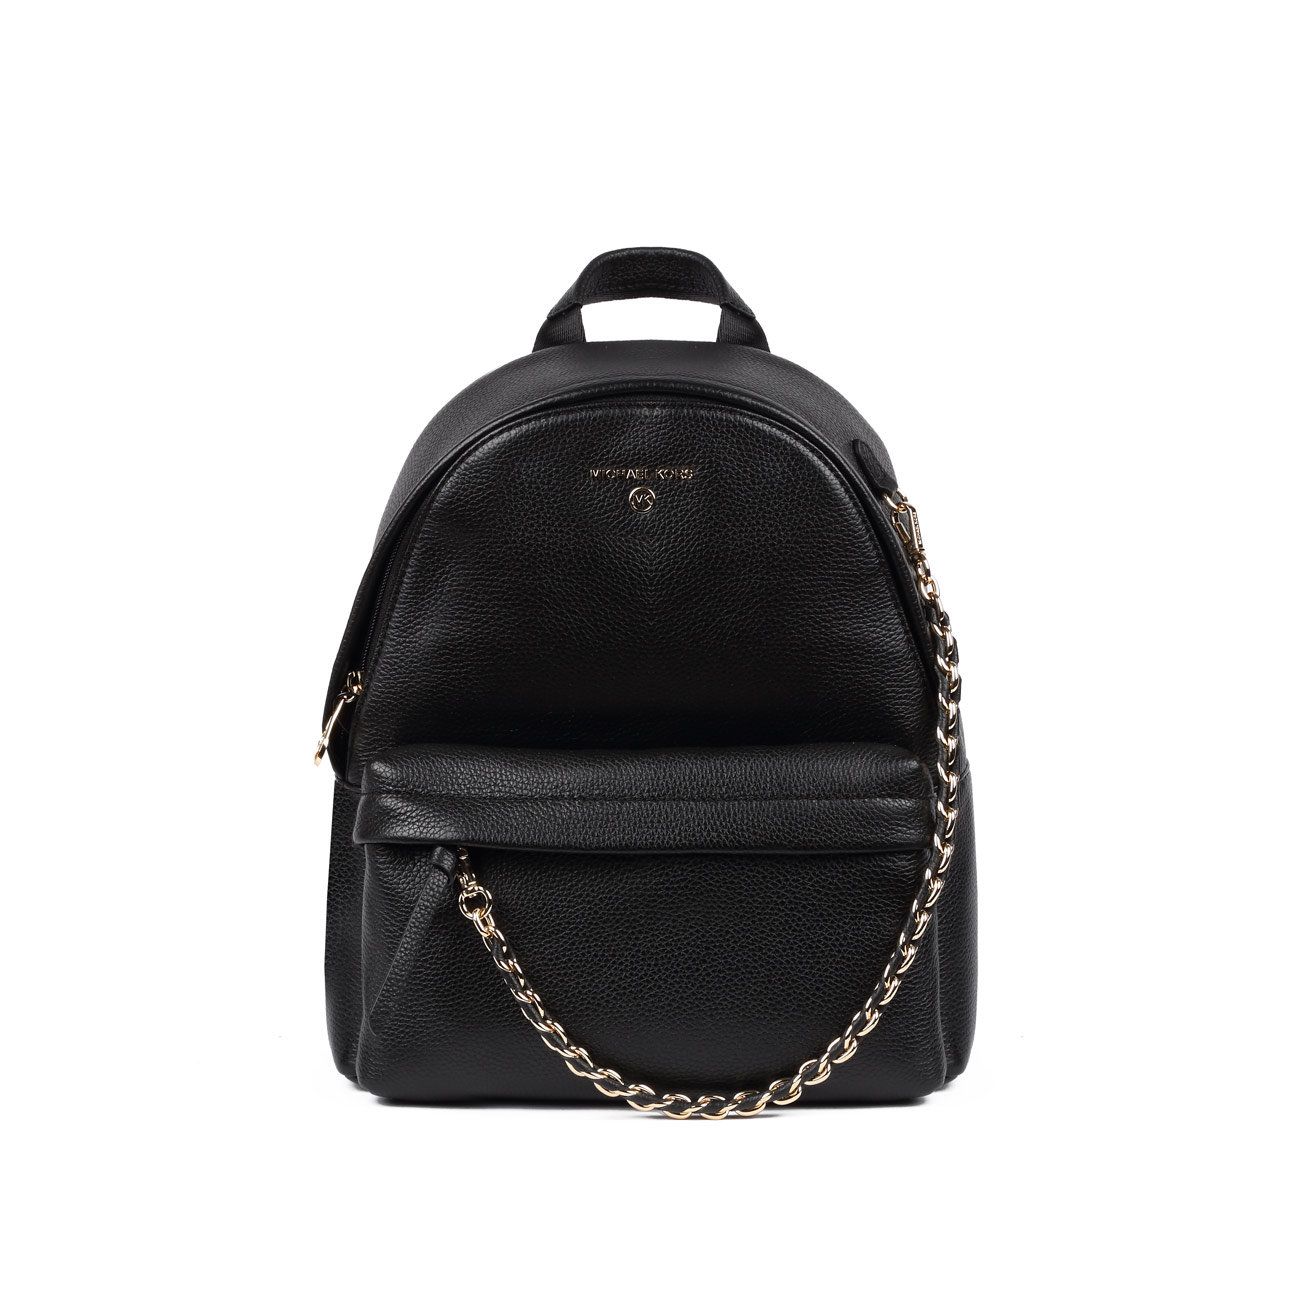 MICHAEL KORS SLATER PEBBLED LEATHER BACKPACK WITH GOLD CHAIN Woman